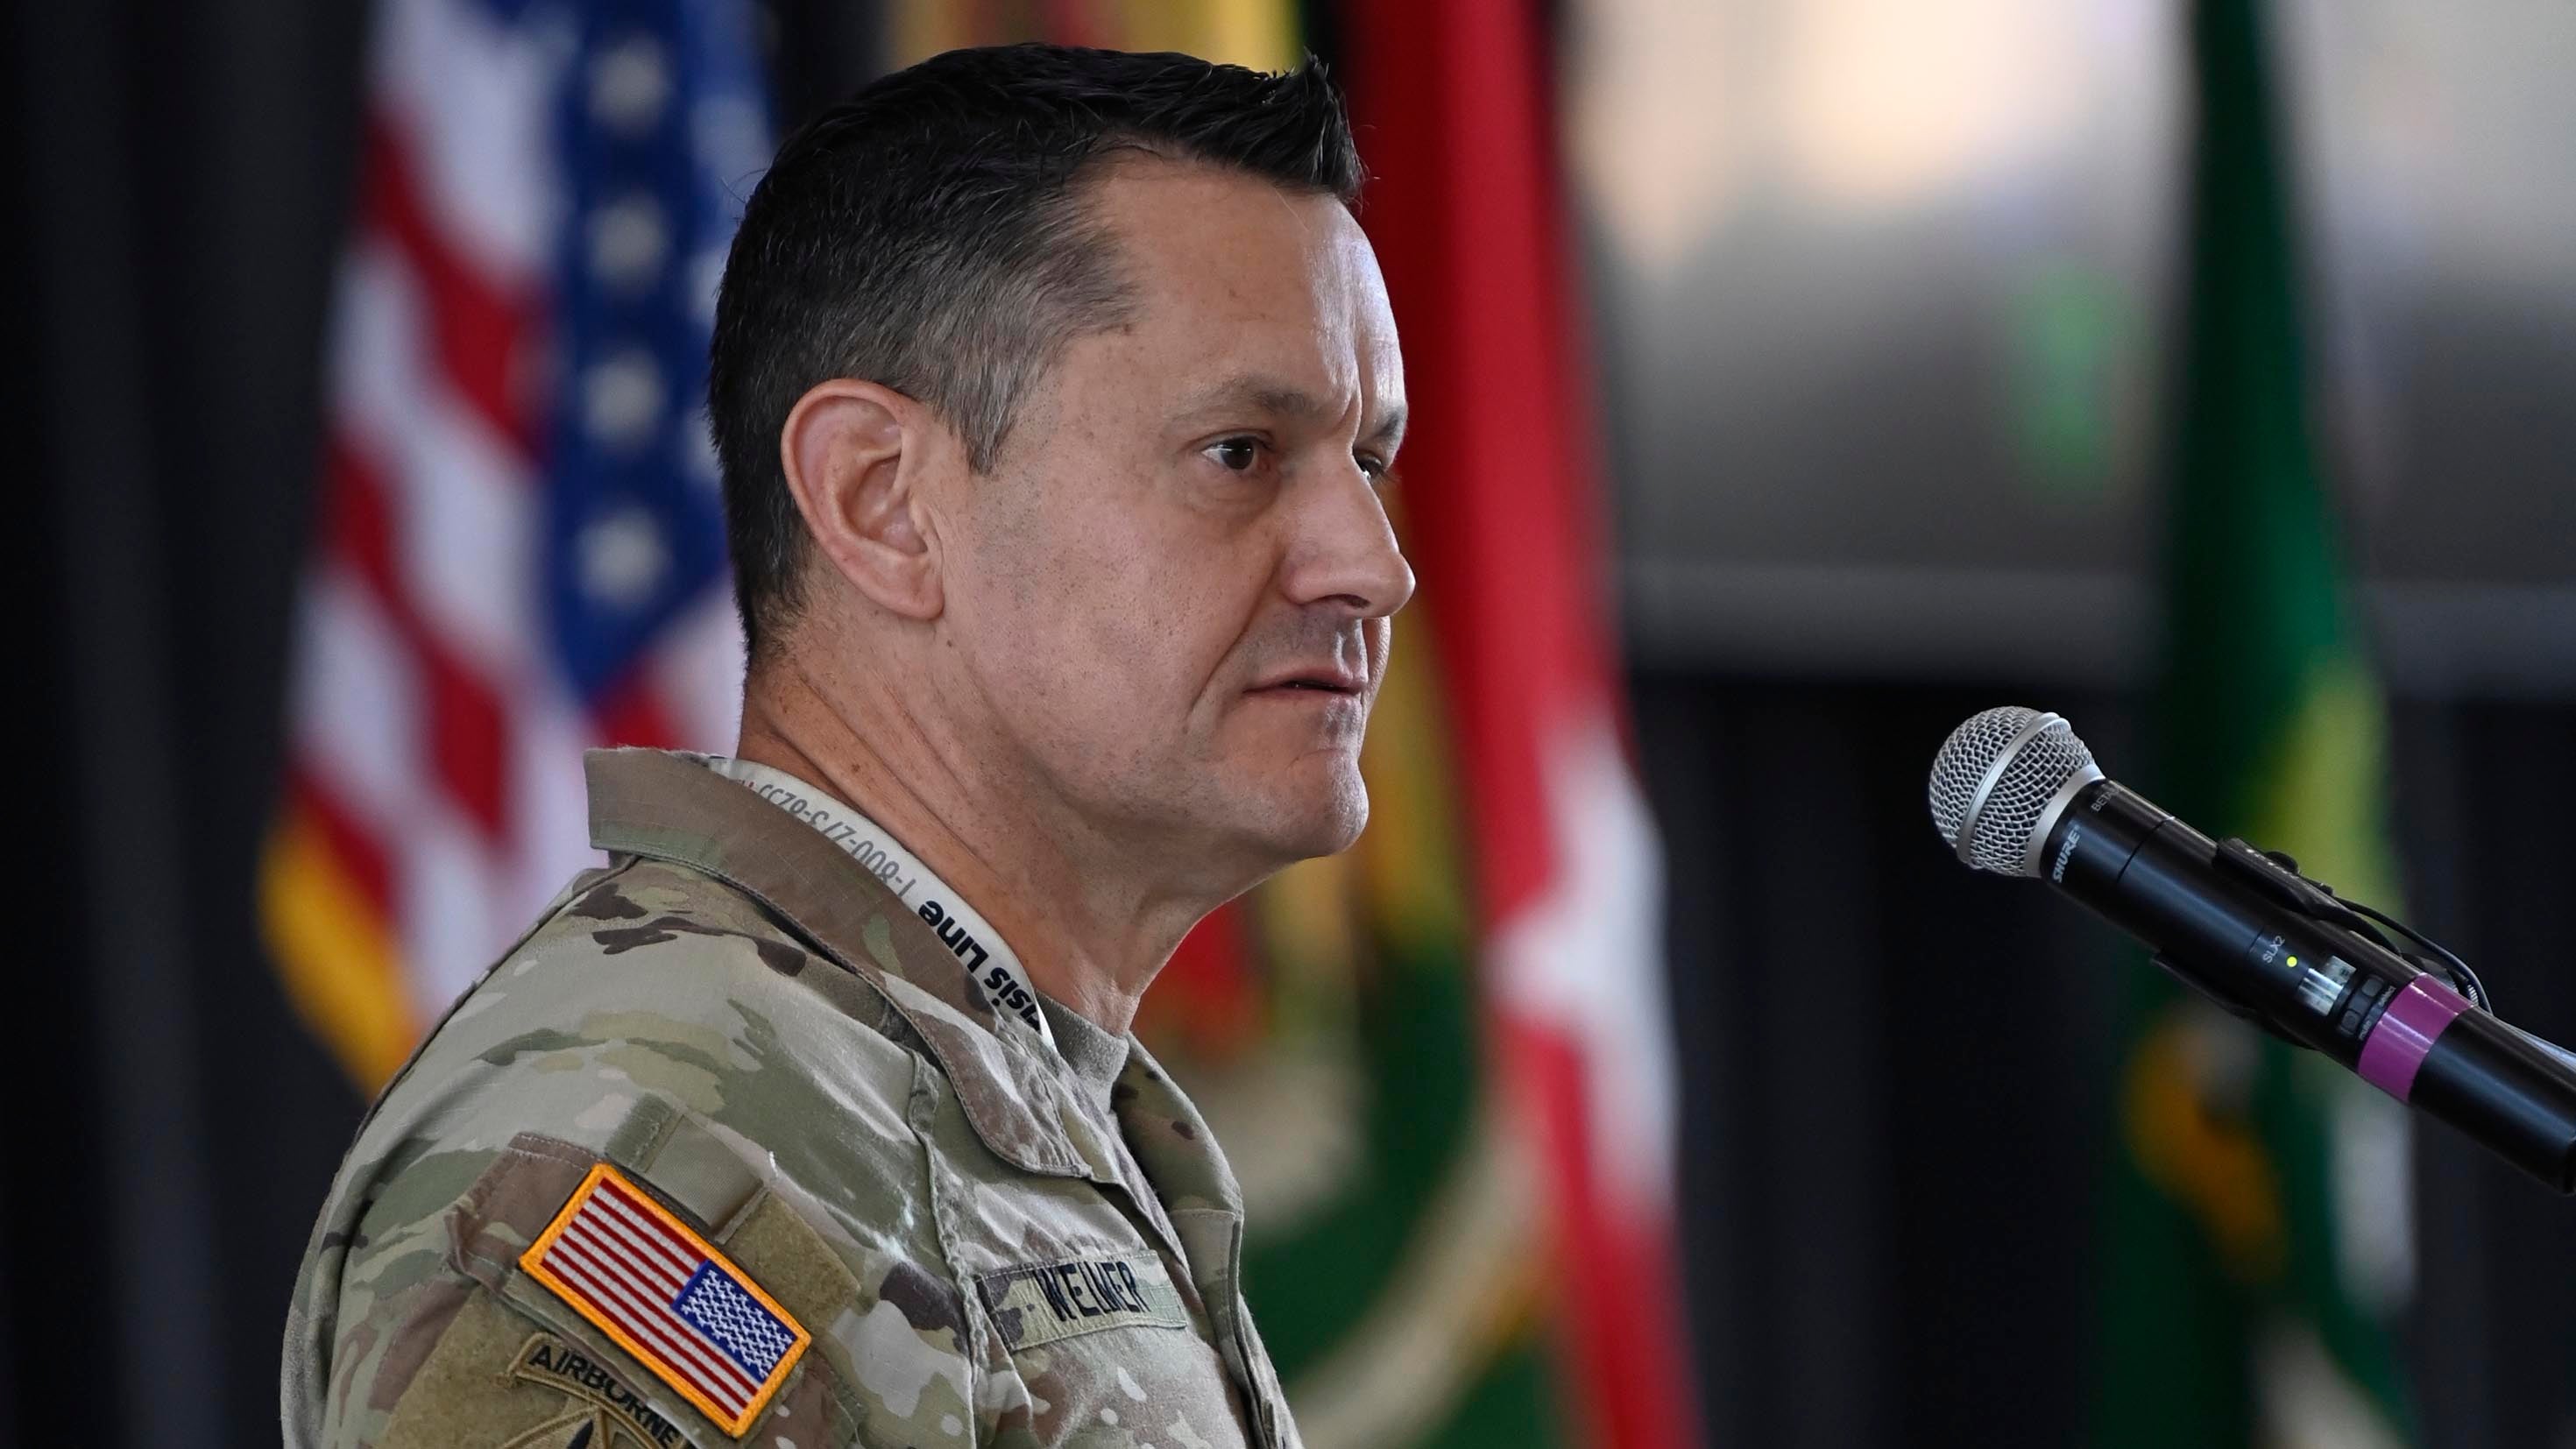 Command Sgt. Maj. Michael Weimer speaks at an event.